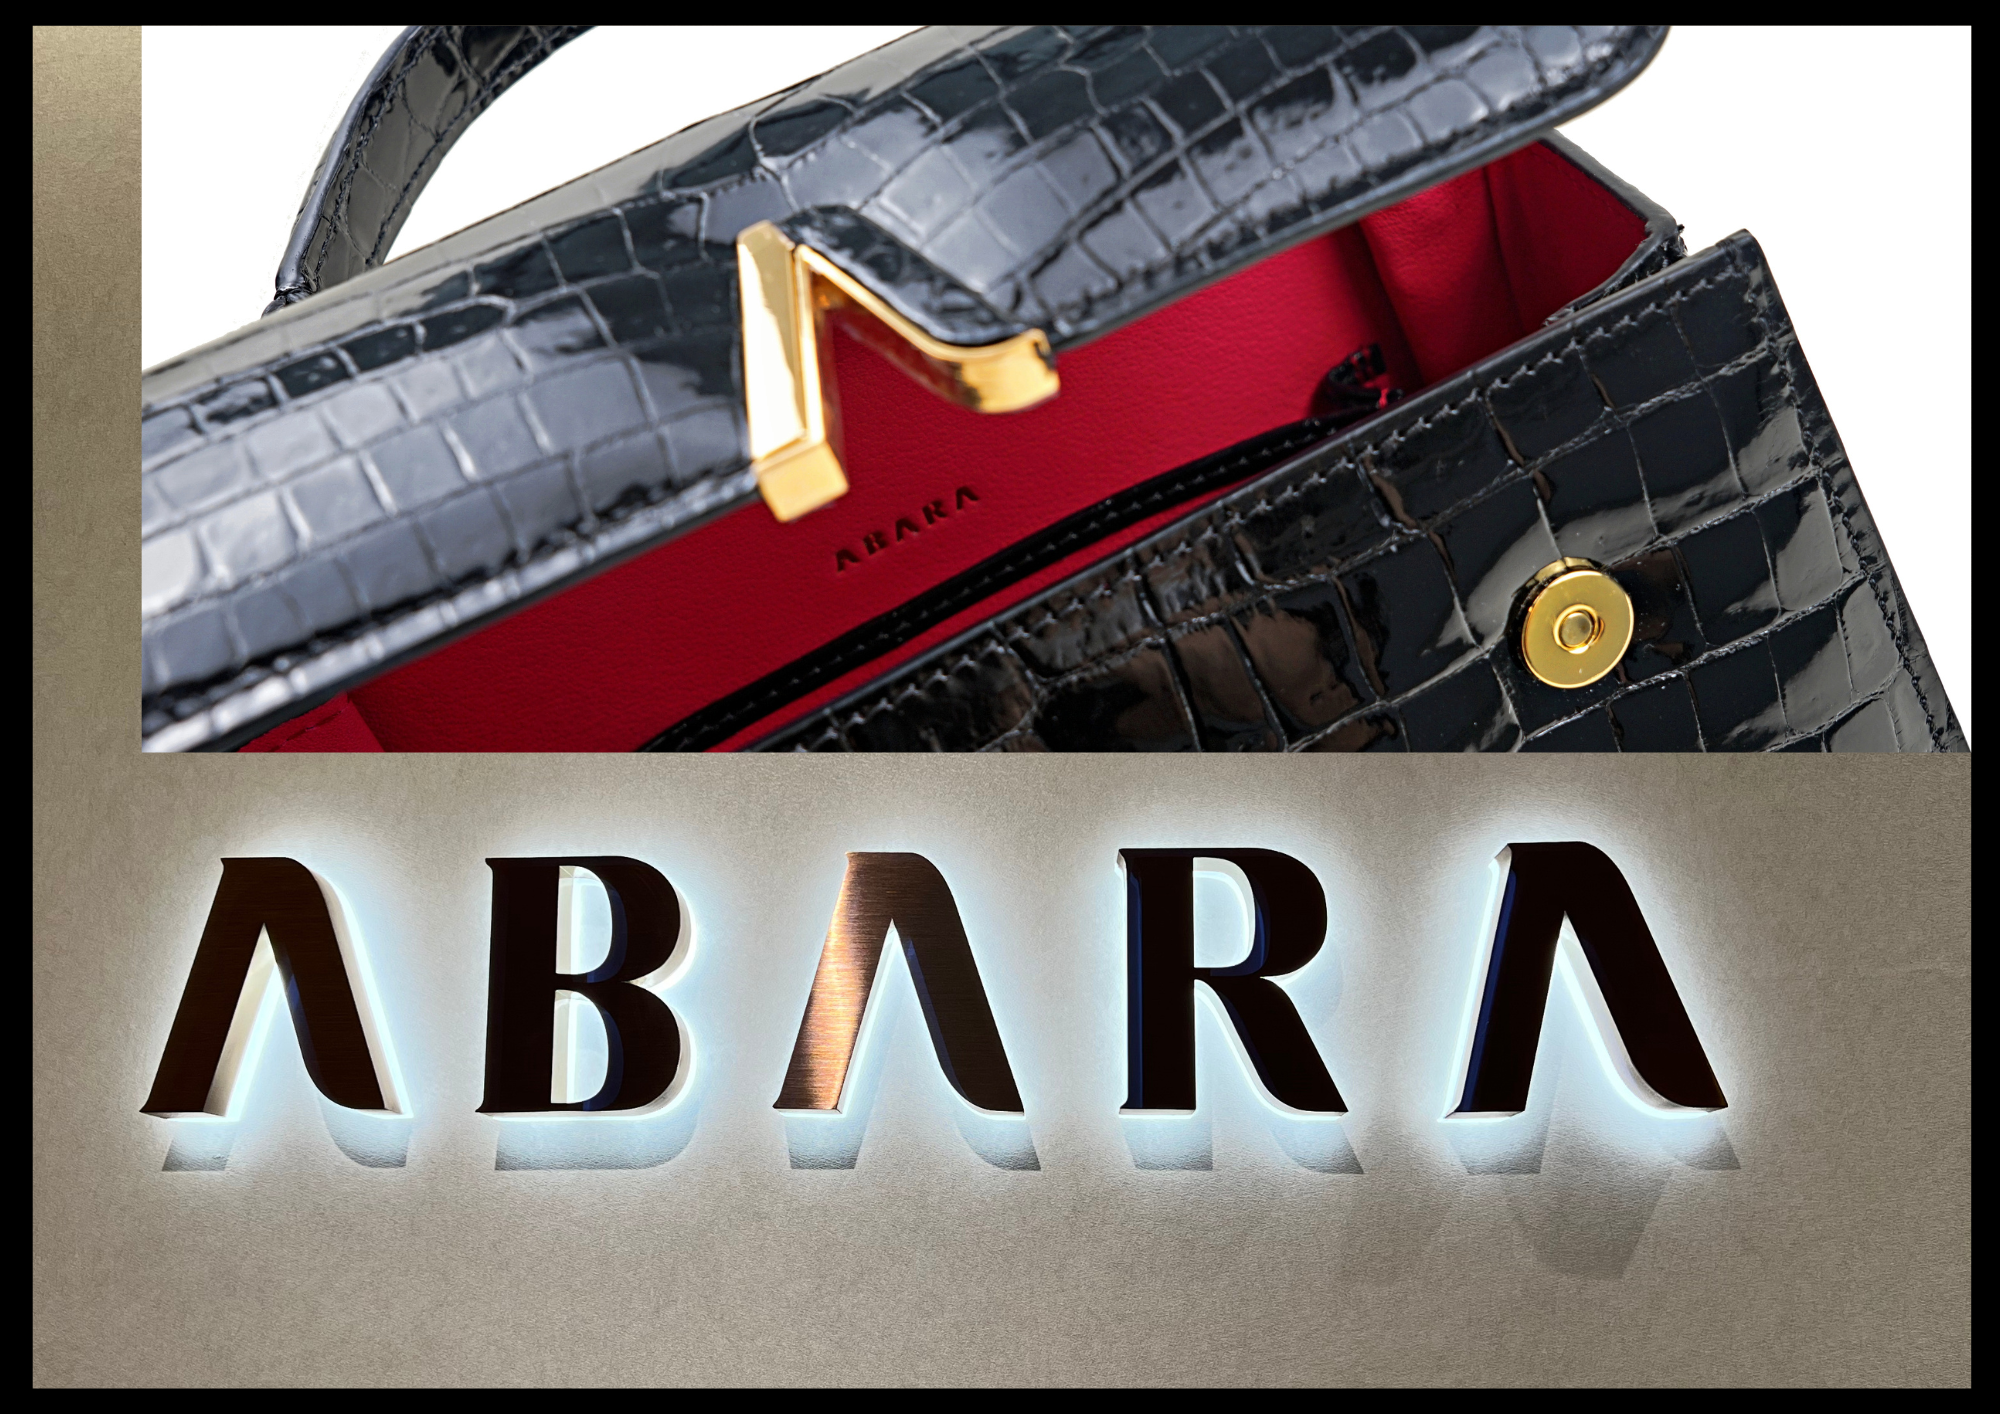 What Is Your Favourite ABARA Bag?